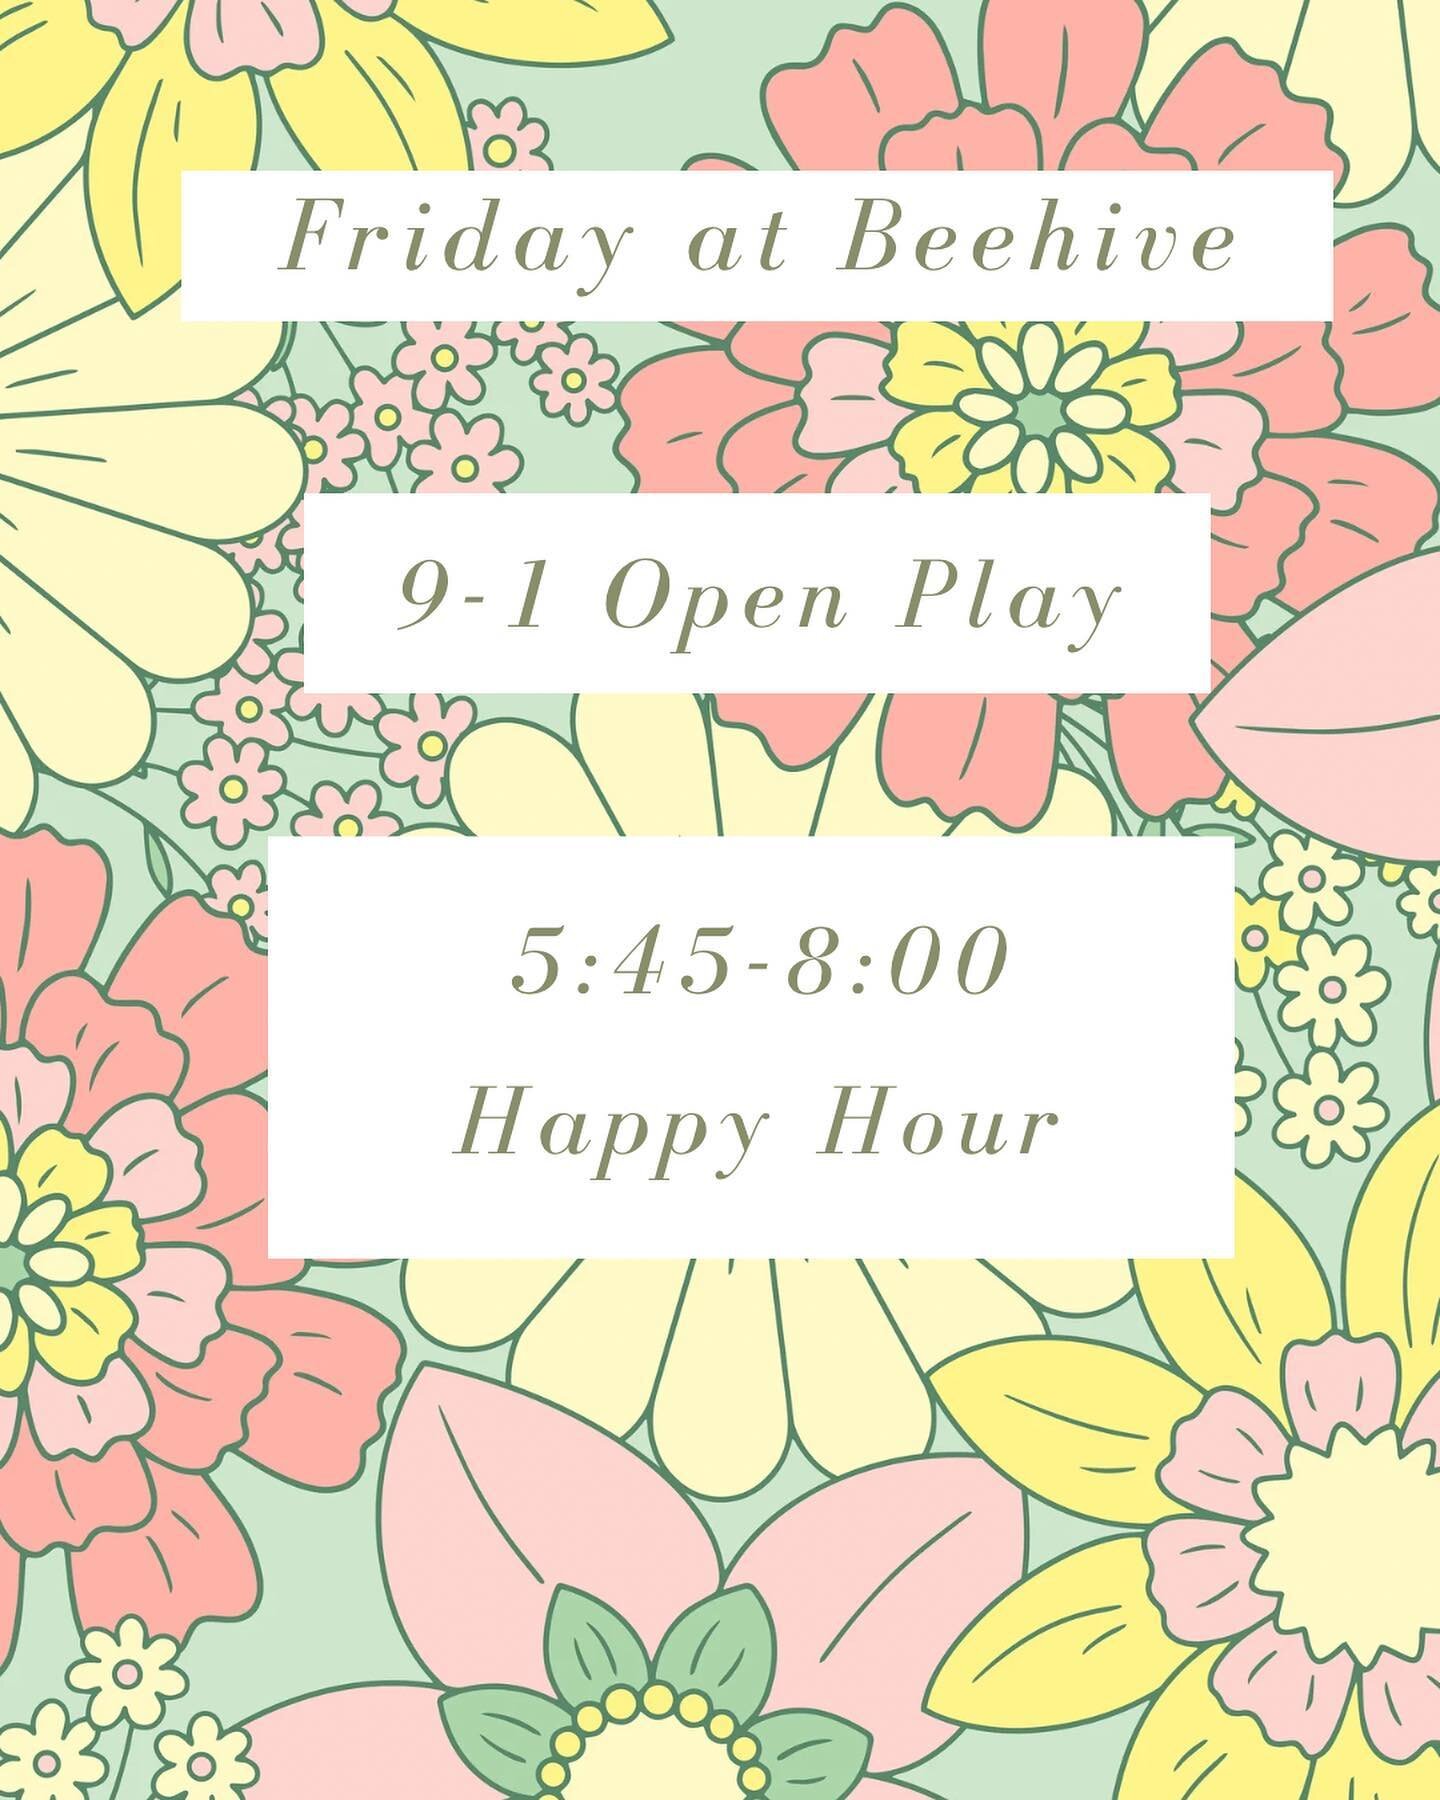 Great weekend line up @beehivecommunity @beehiveupstairs 🌟

Friday night is Happy Hour with a spring themed community craft 🌱 BYO drink &amp; food! 5:45-8

Saturday features two Beehive favs: @musicwithcaralyn at 11 &amp; @im.storyadventures with a